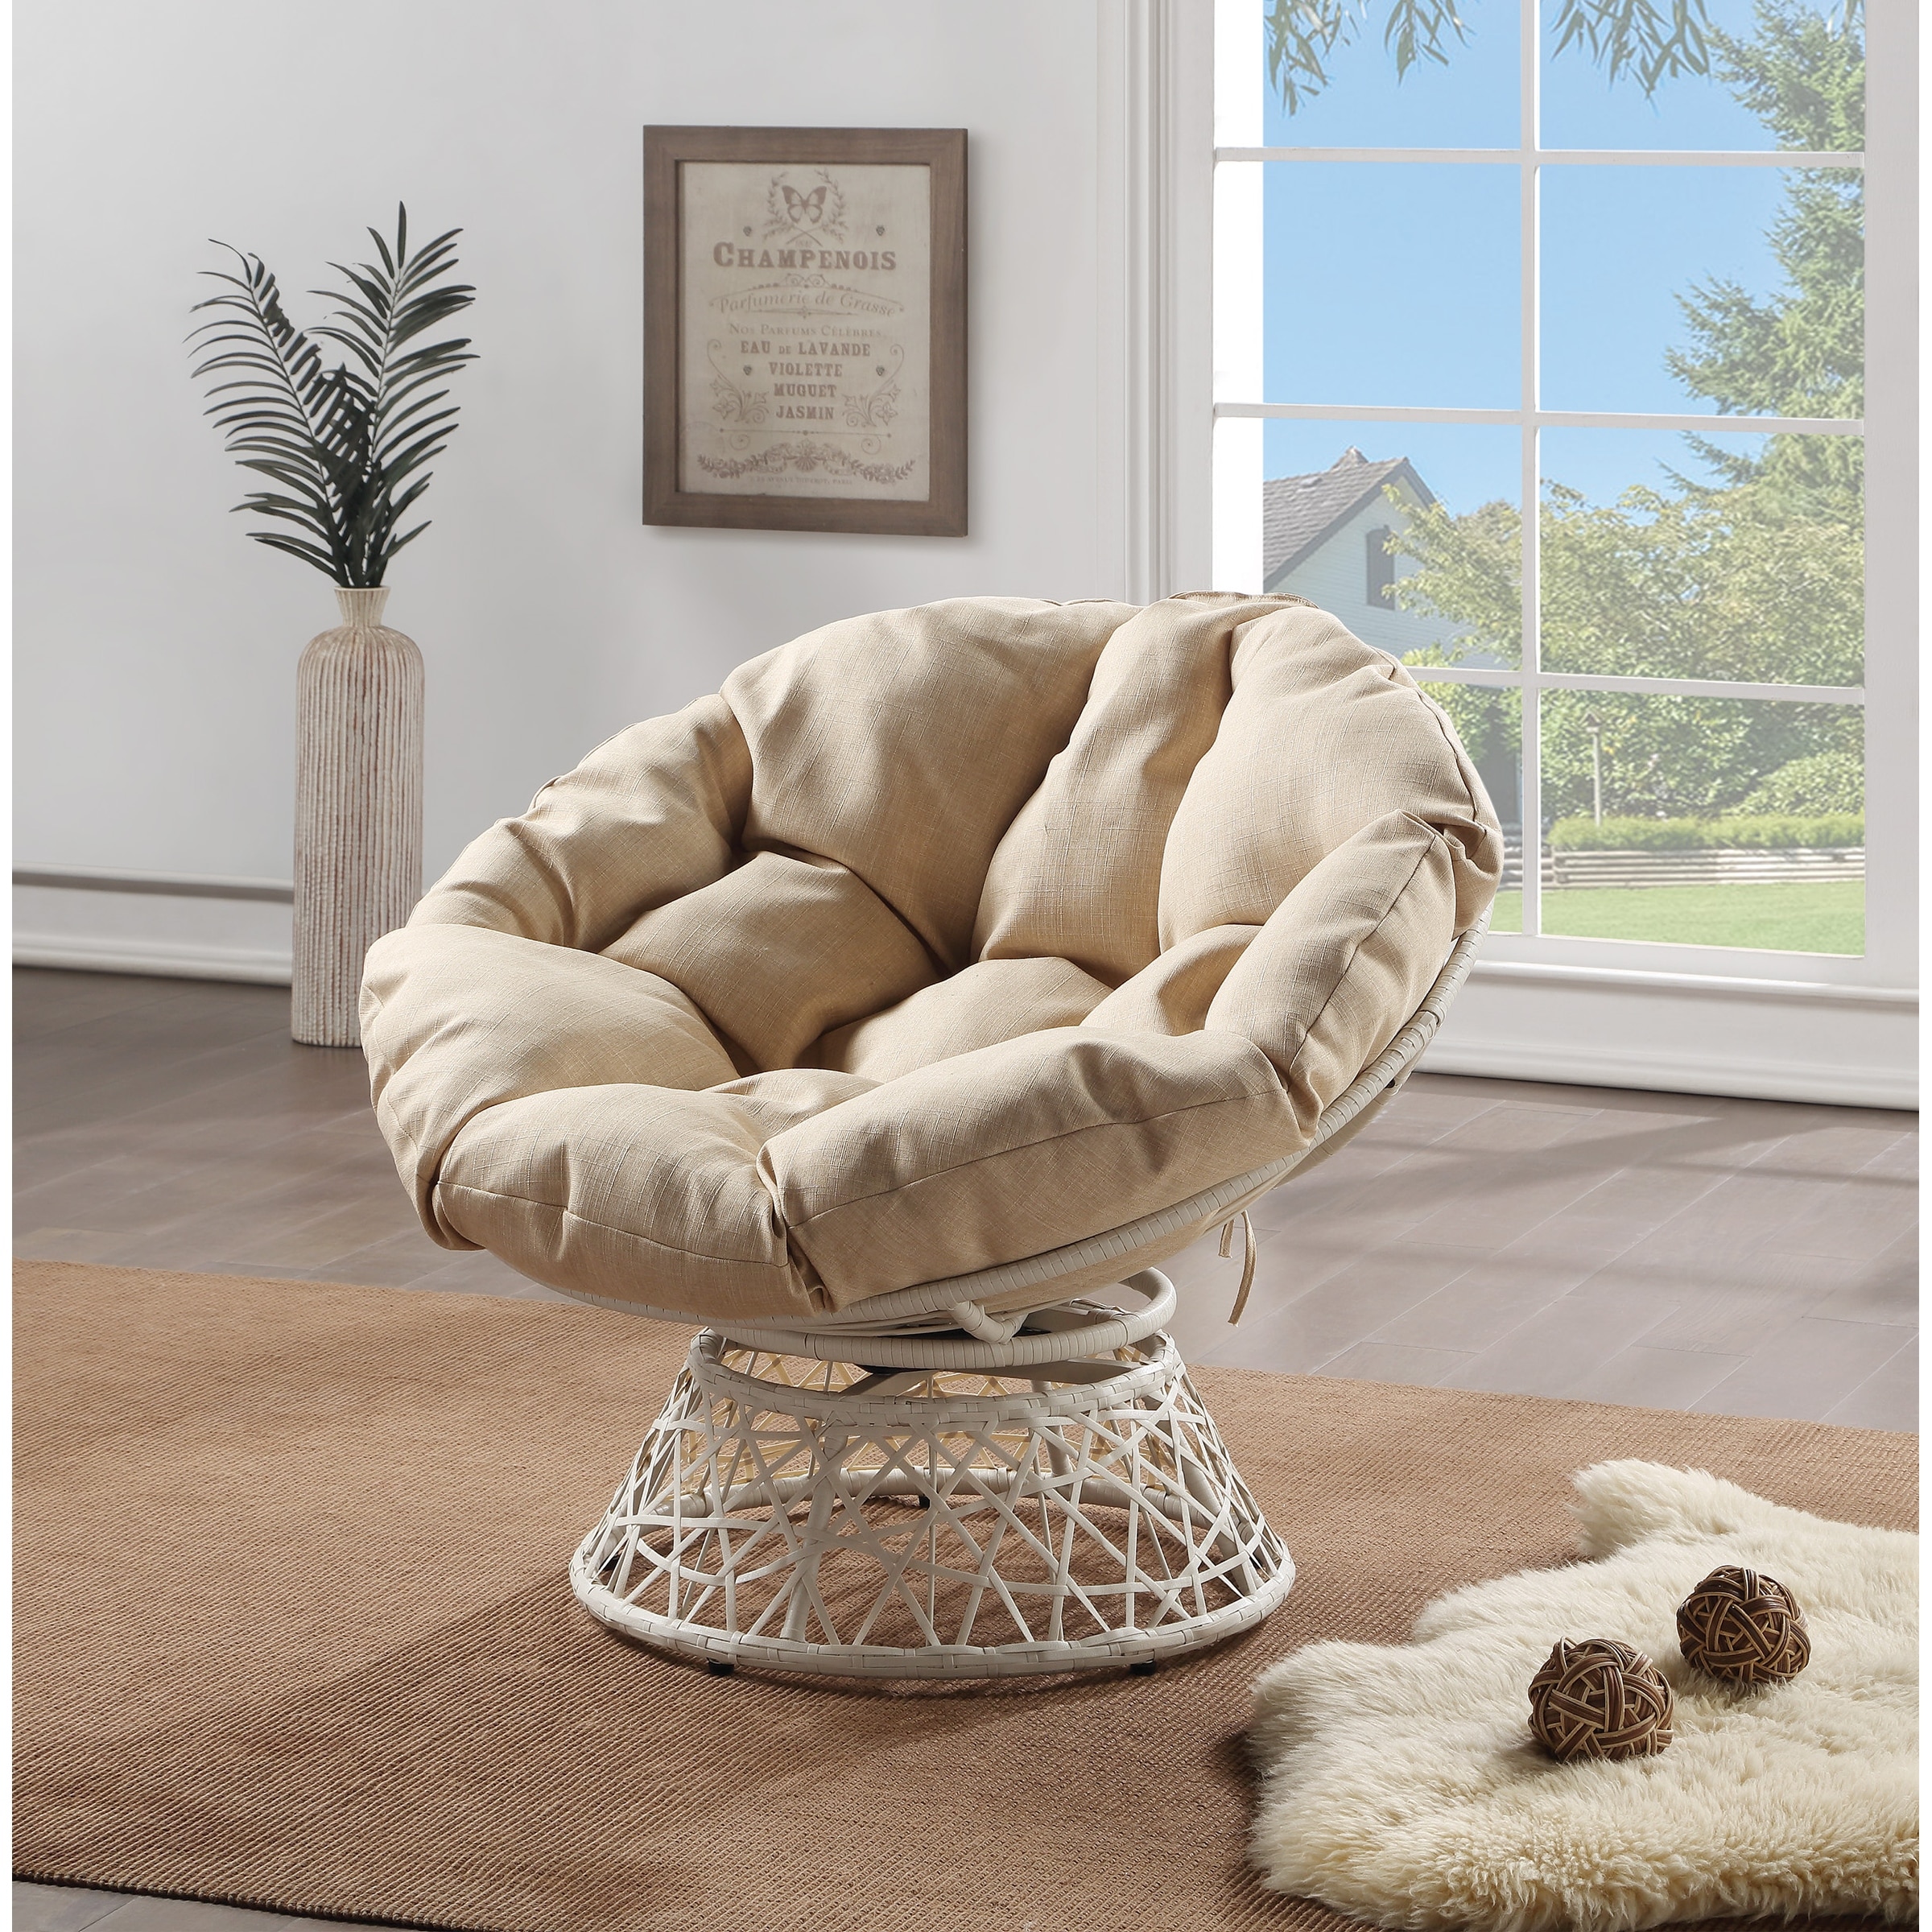 https://ak1.ostkcdn.com/images/products/is/images/direct/8e844106b6bbdce969c3cf60686f5575423976d6/Papasan-Chair-with-Round-Pillow-Cushion-and-Cream-Wicker-Weave.jpg